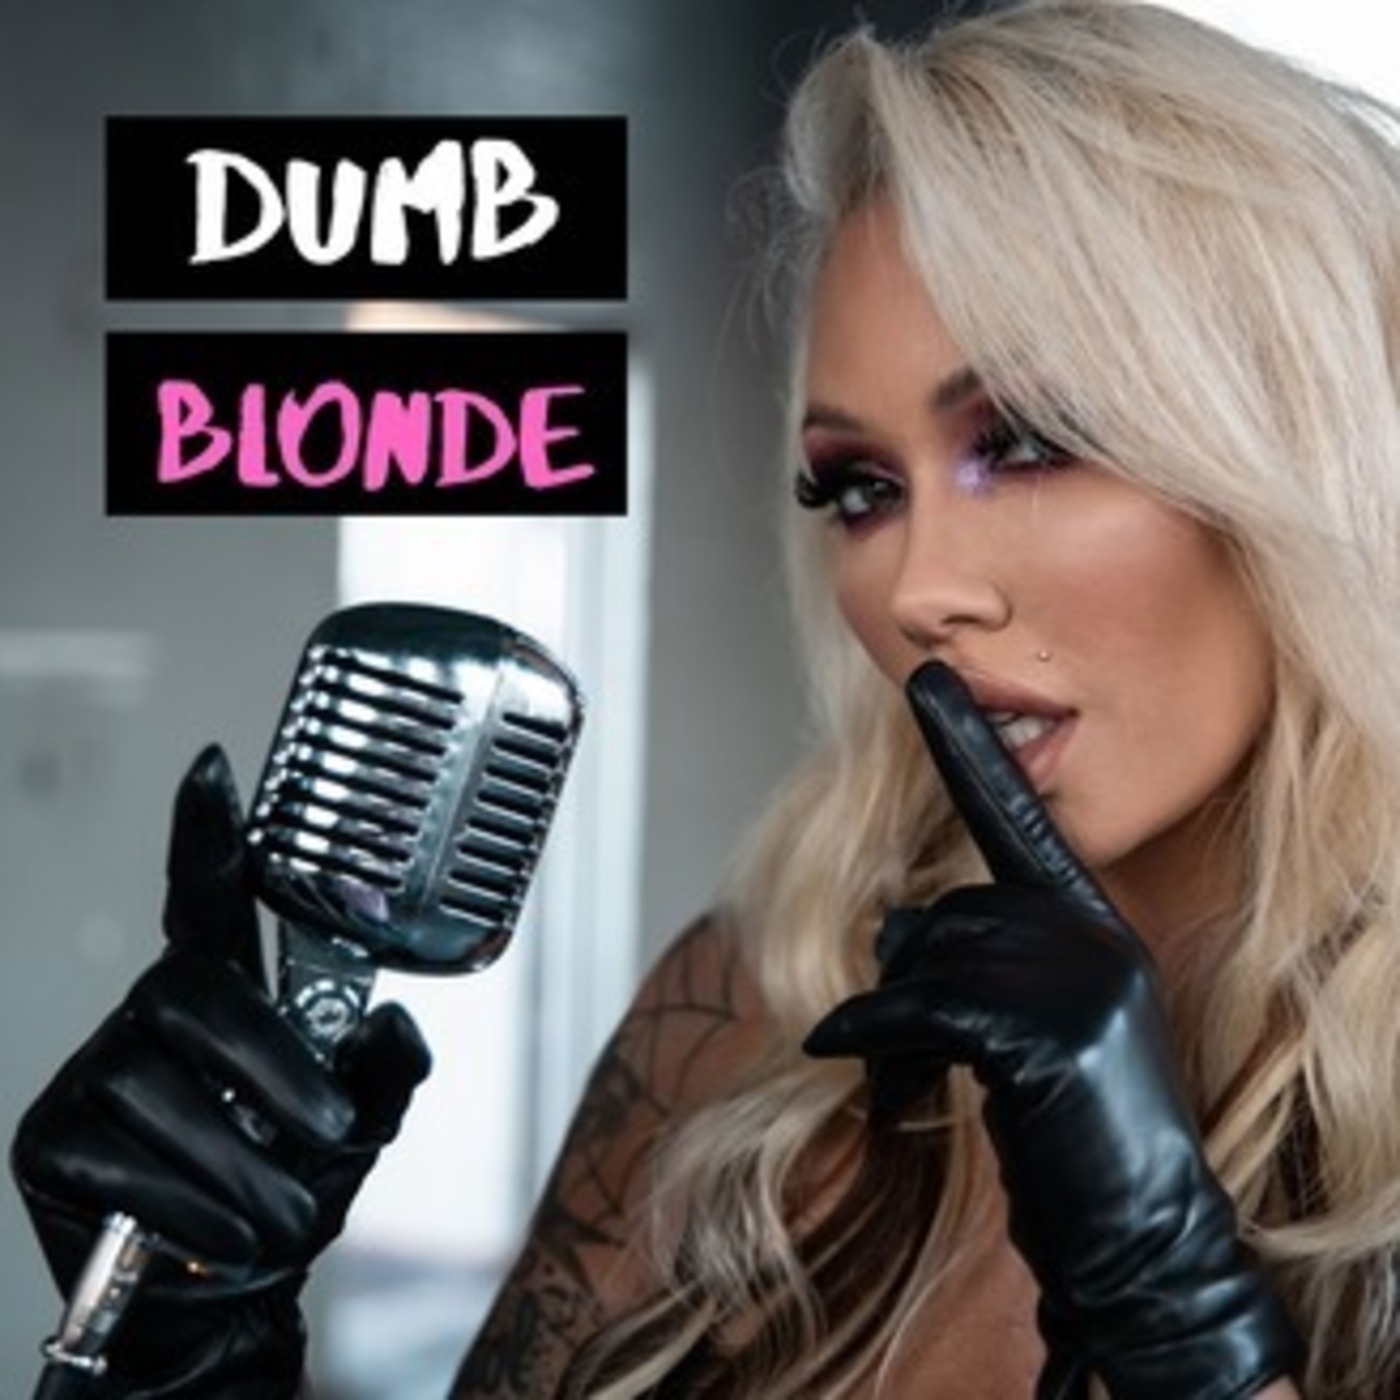 #71 Dumb Blonde: Manager Meme - Mental Health Check by Dumb Blonde Productions